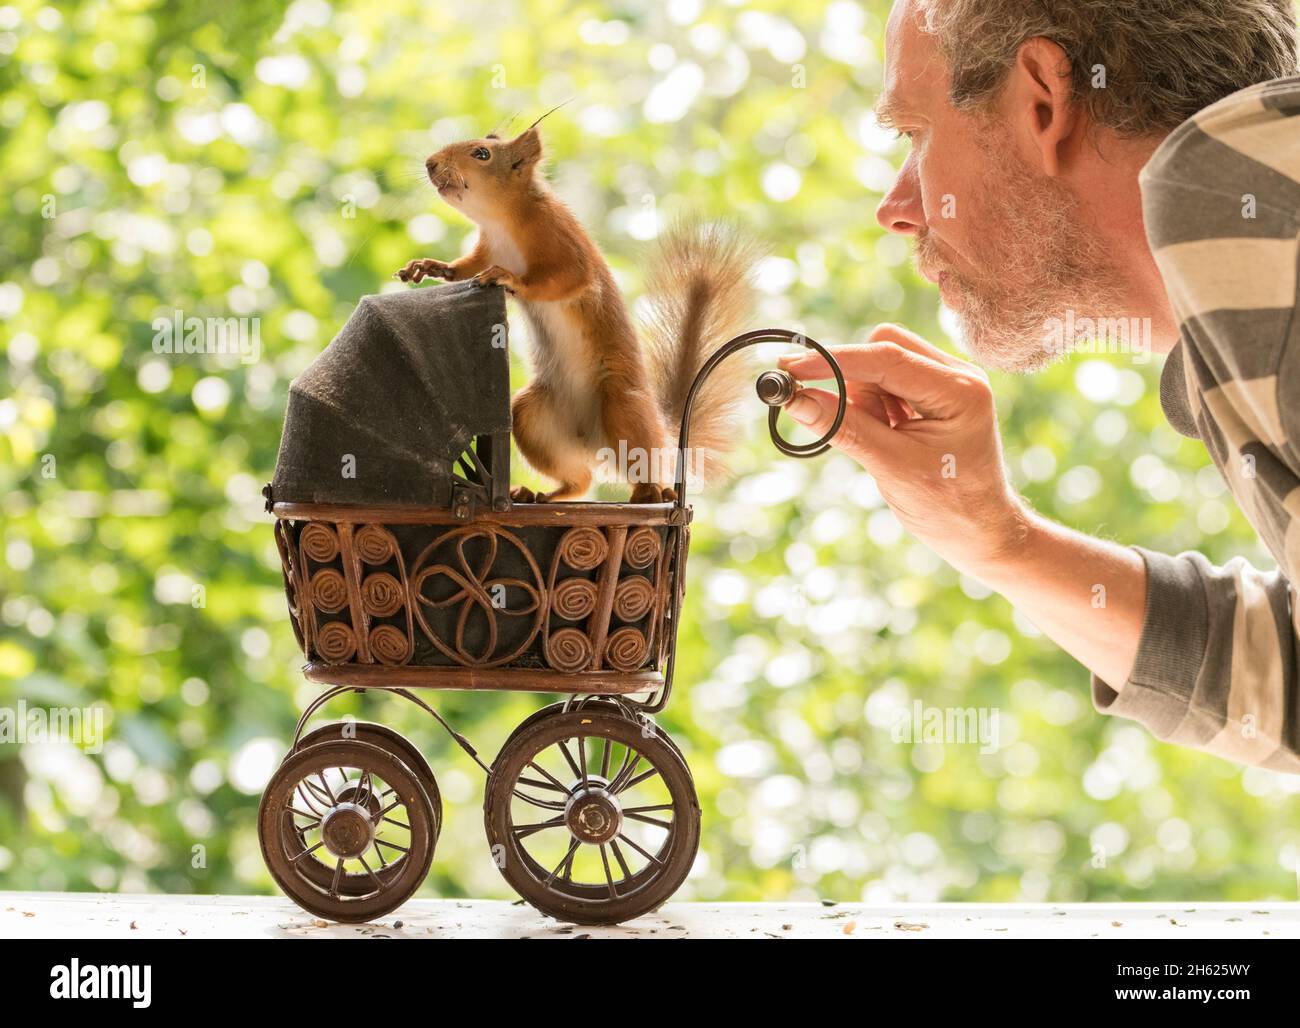 red squirrel and man with a baby stroller Stock Photo